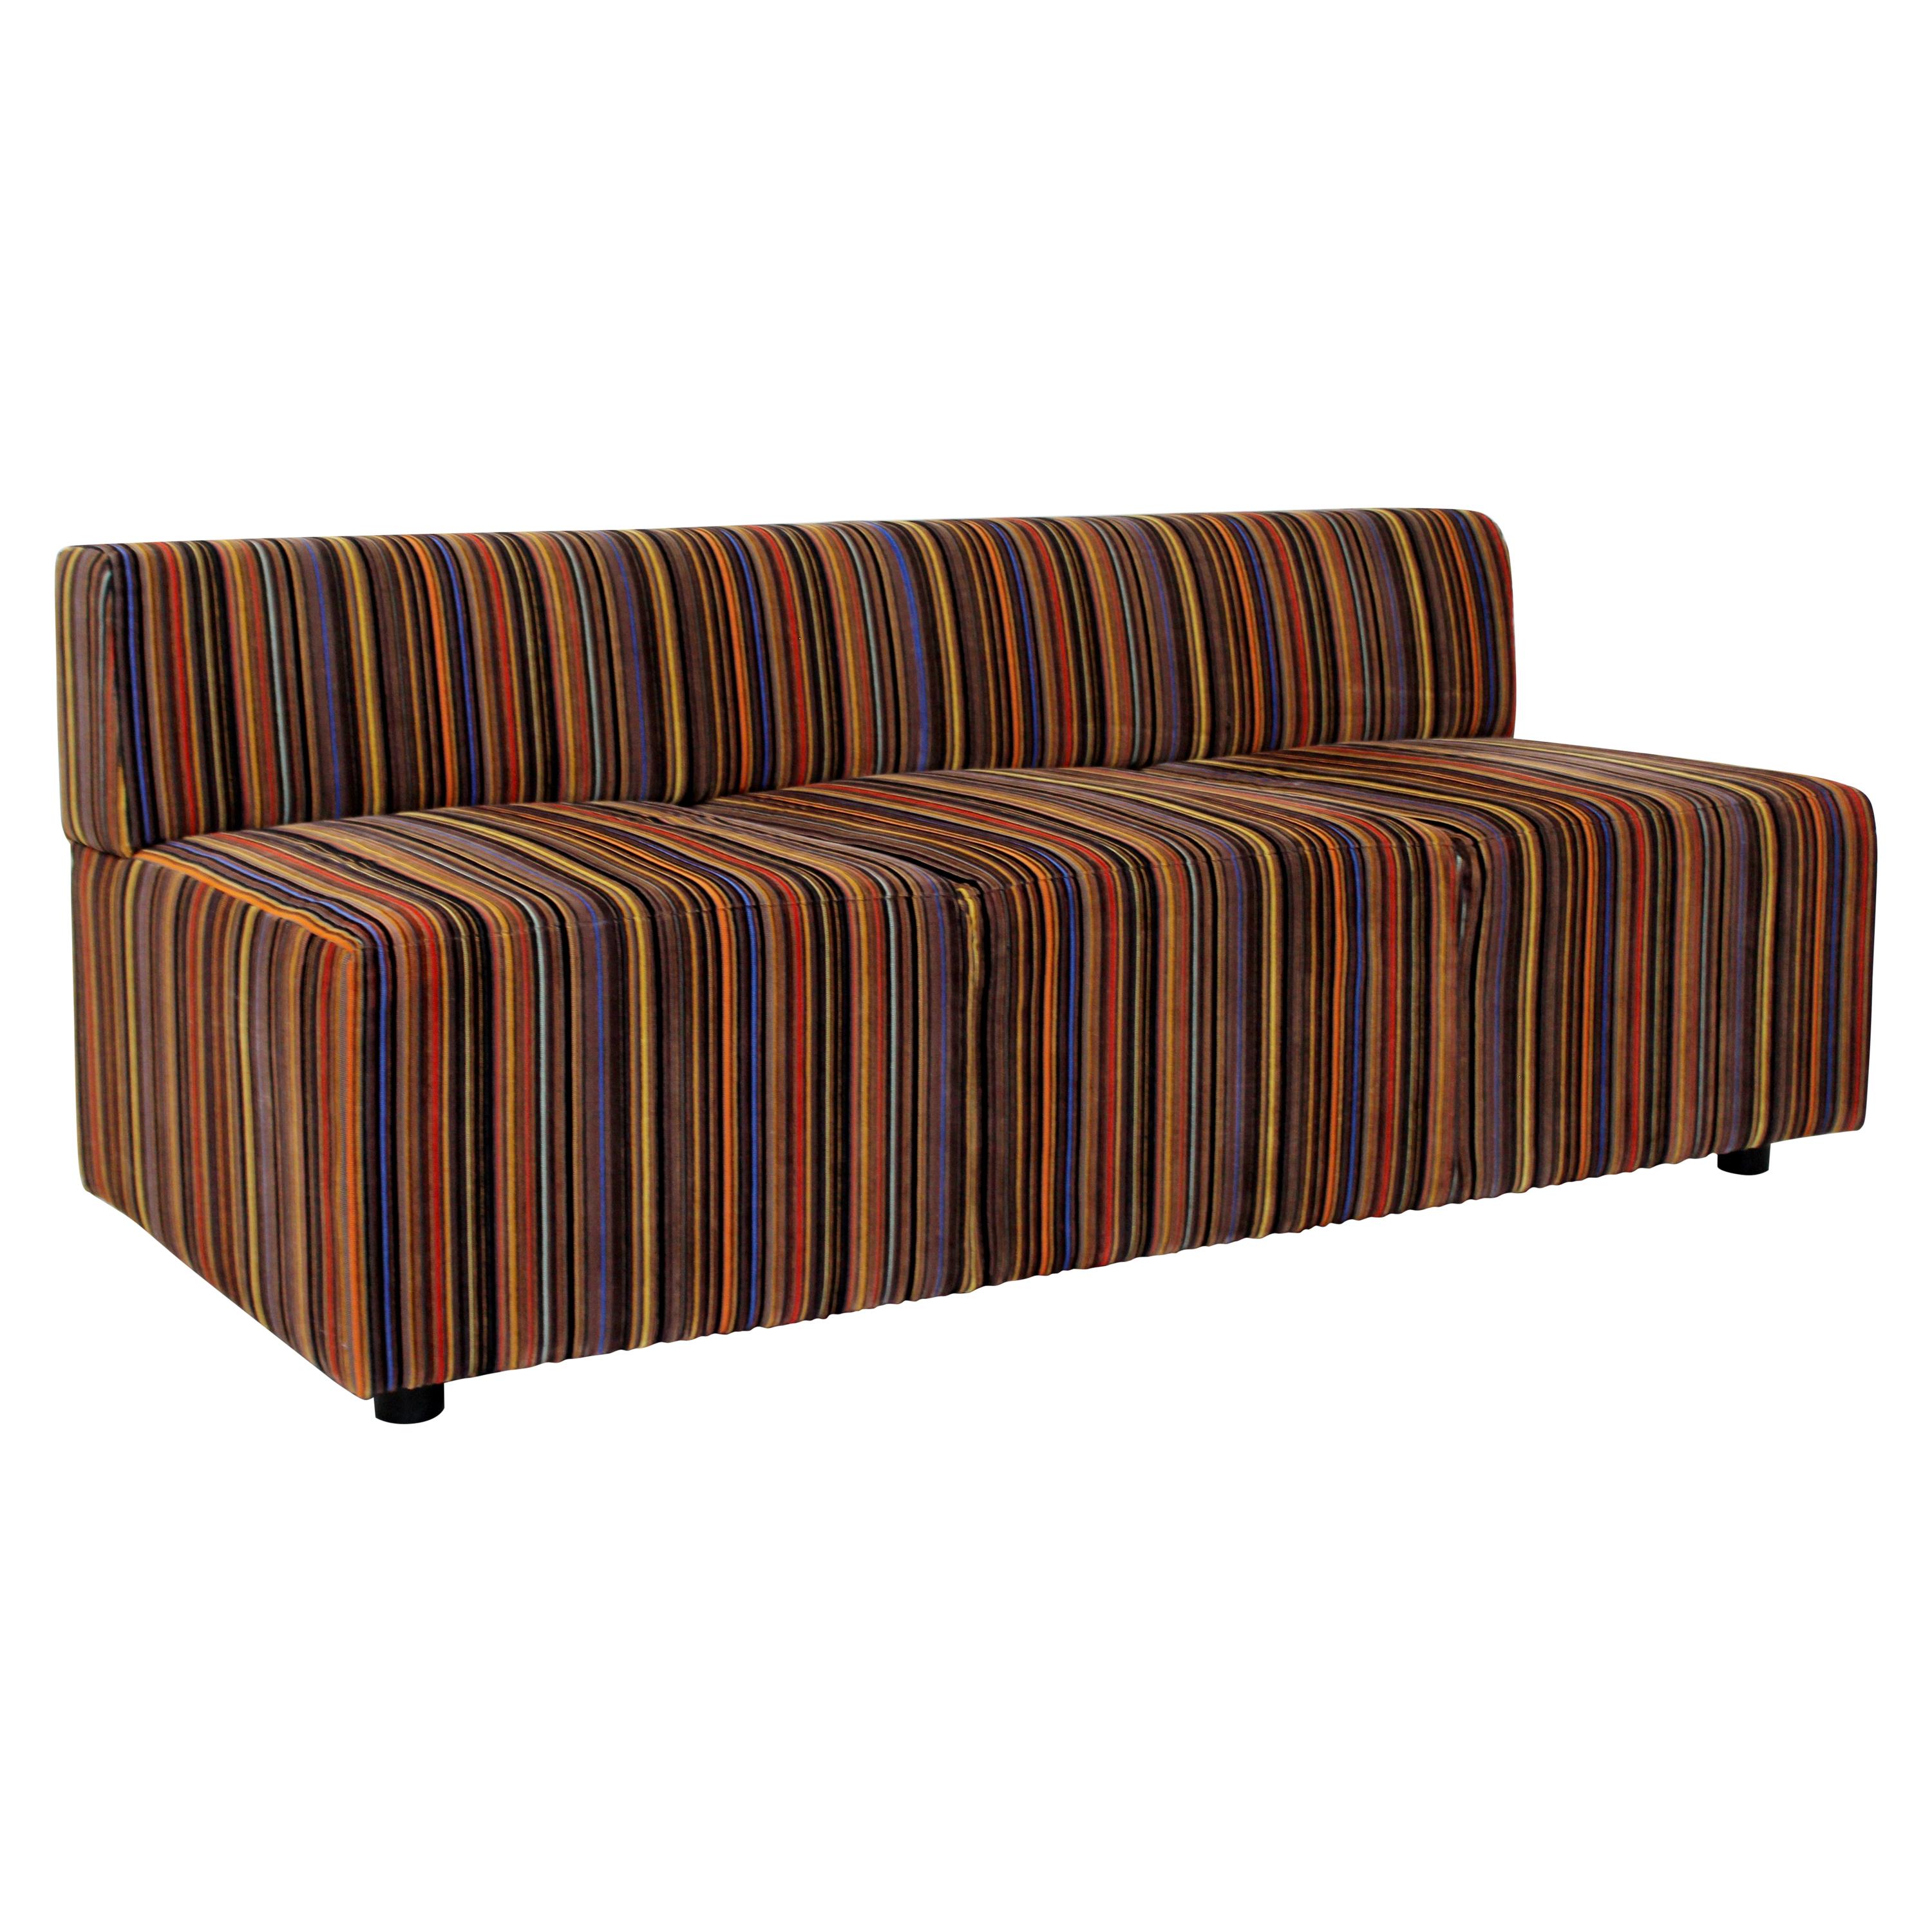 Contemporary Modernist Vintage Style Coalesse Steelcase Loveseat Sofa Striped